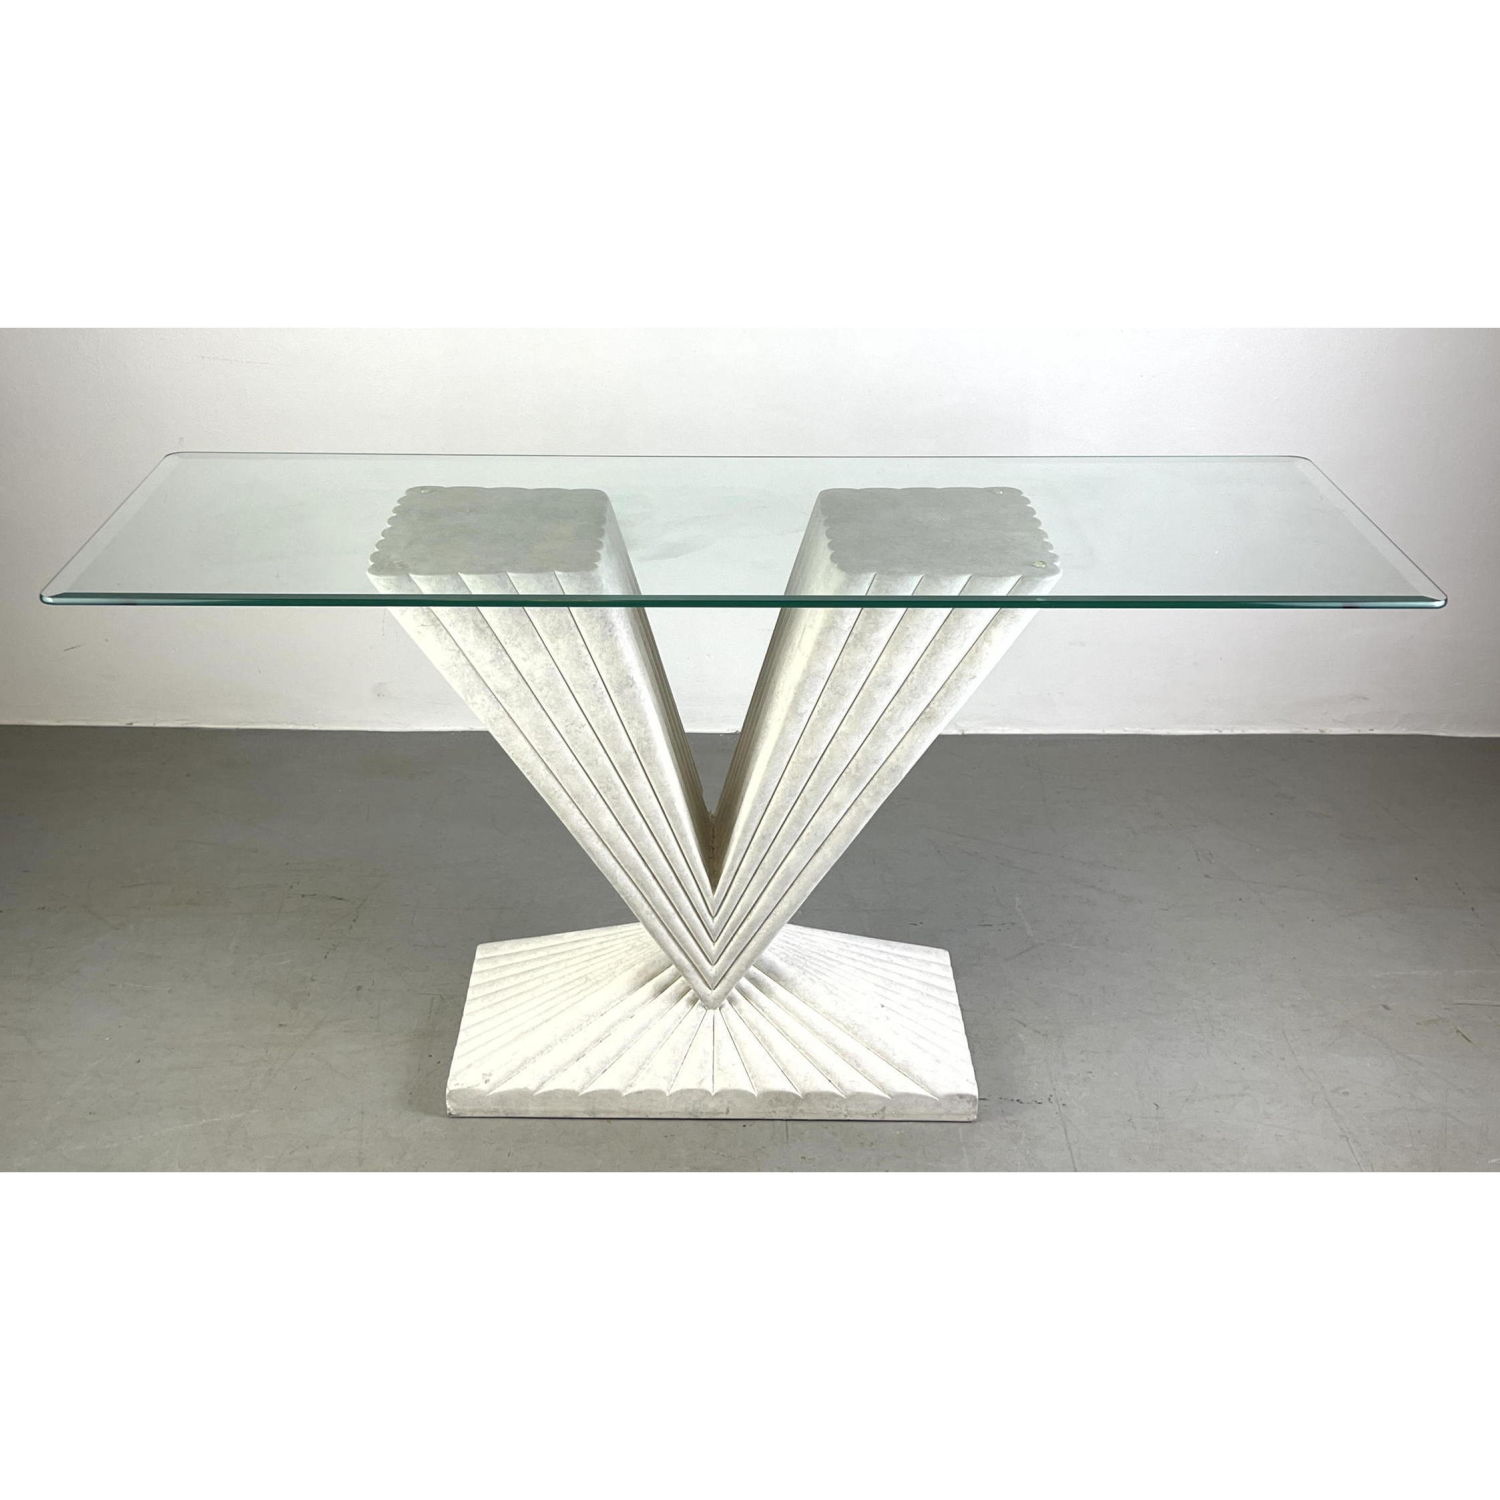 ART DECO Inspired Glass Top Console